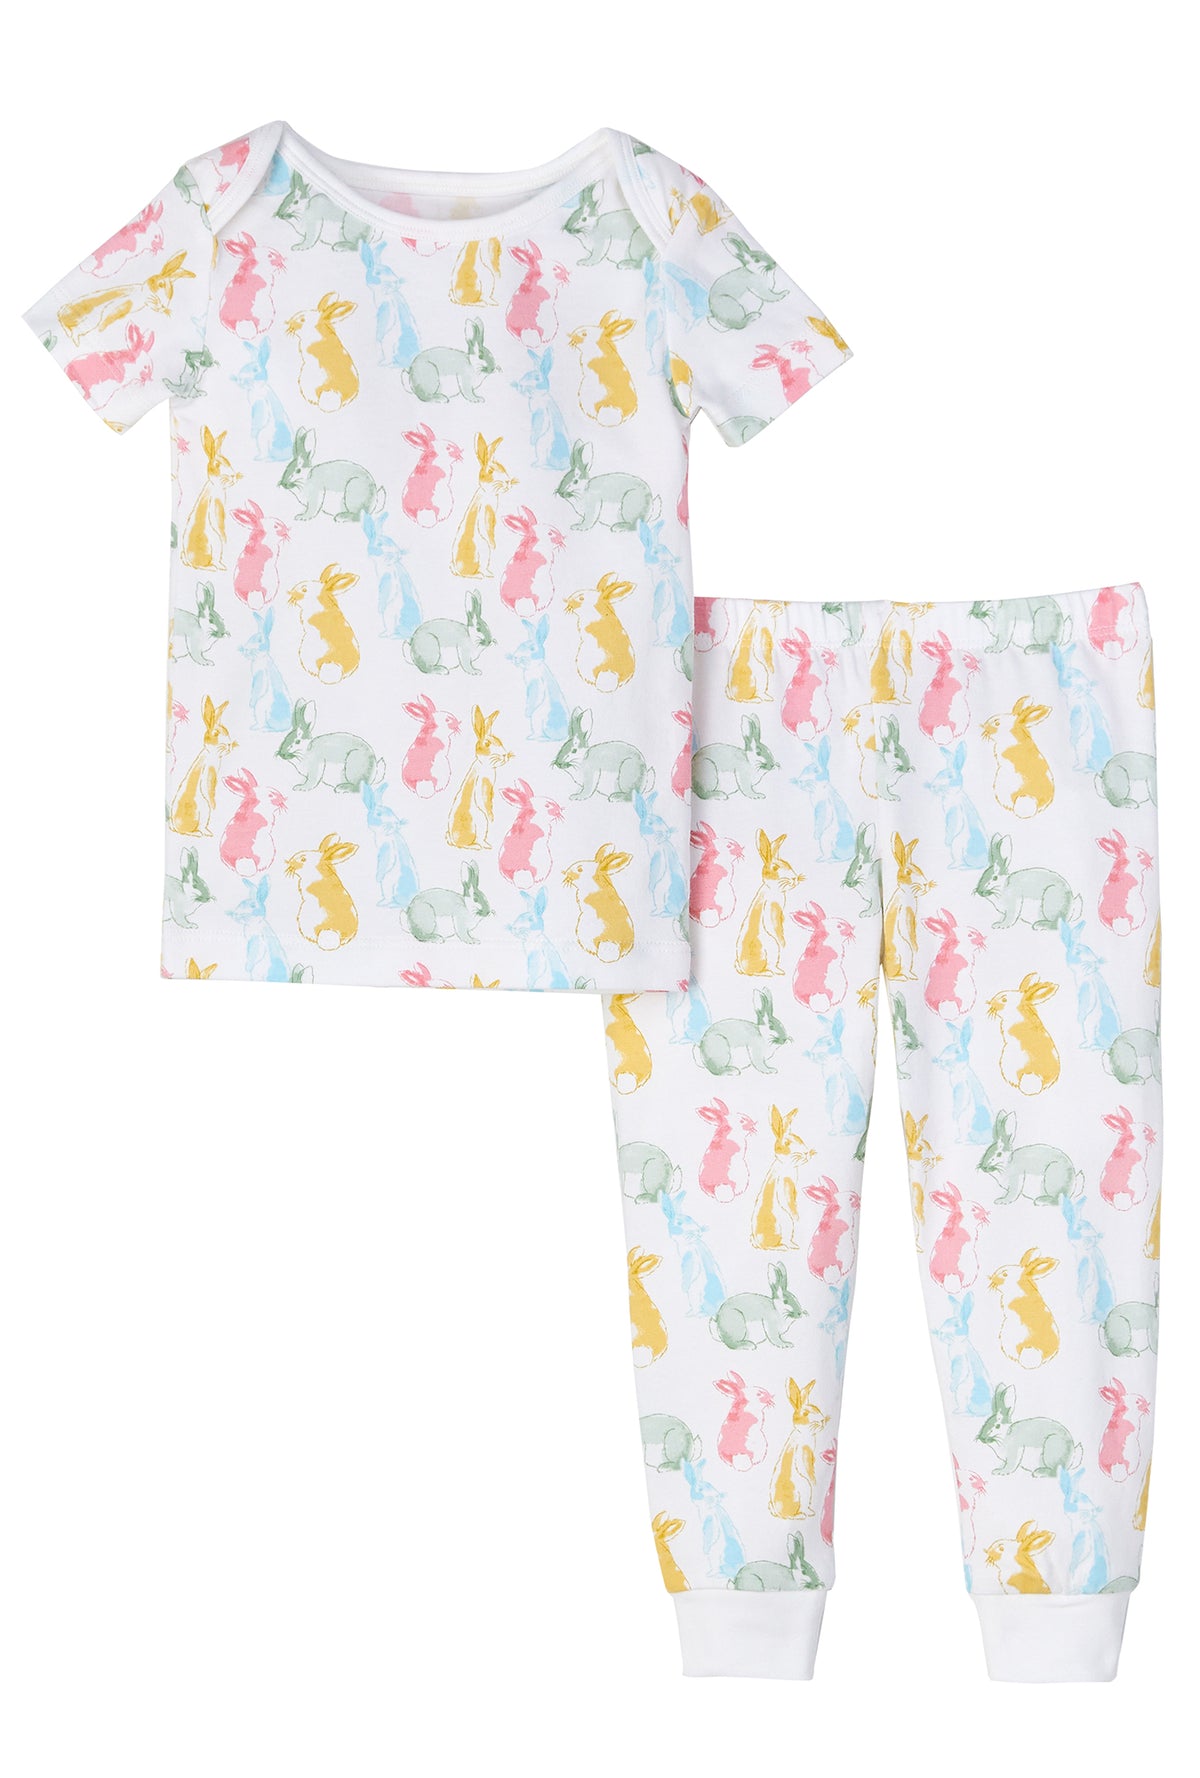 A toddler wearing white short sleeve pj set with cottontail print